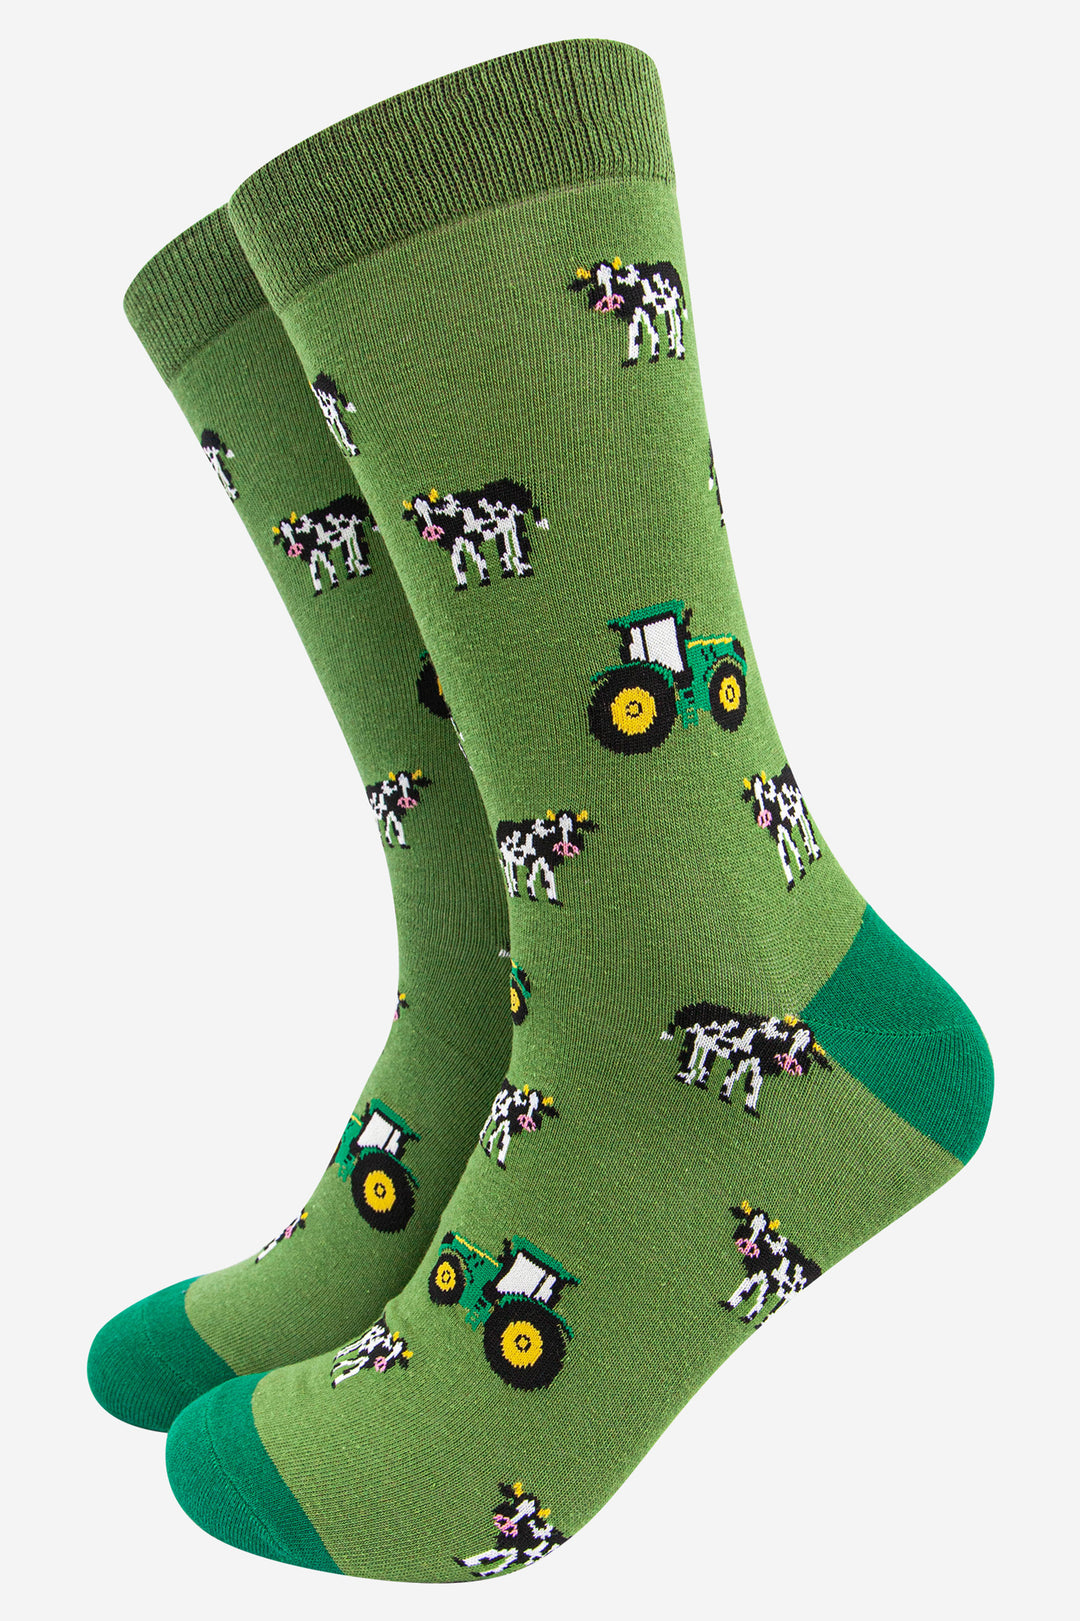 green dress socks with an all over pattern of green tractors and black and white cows